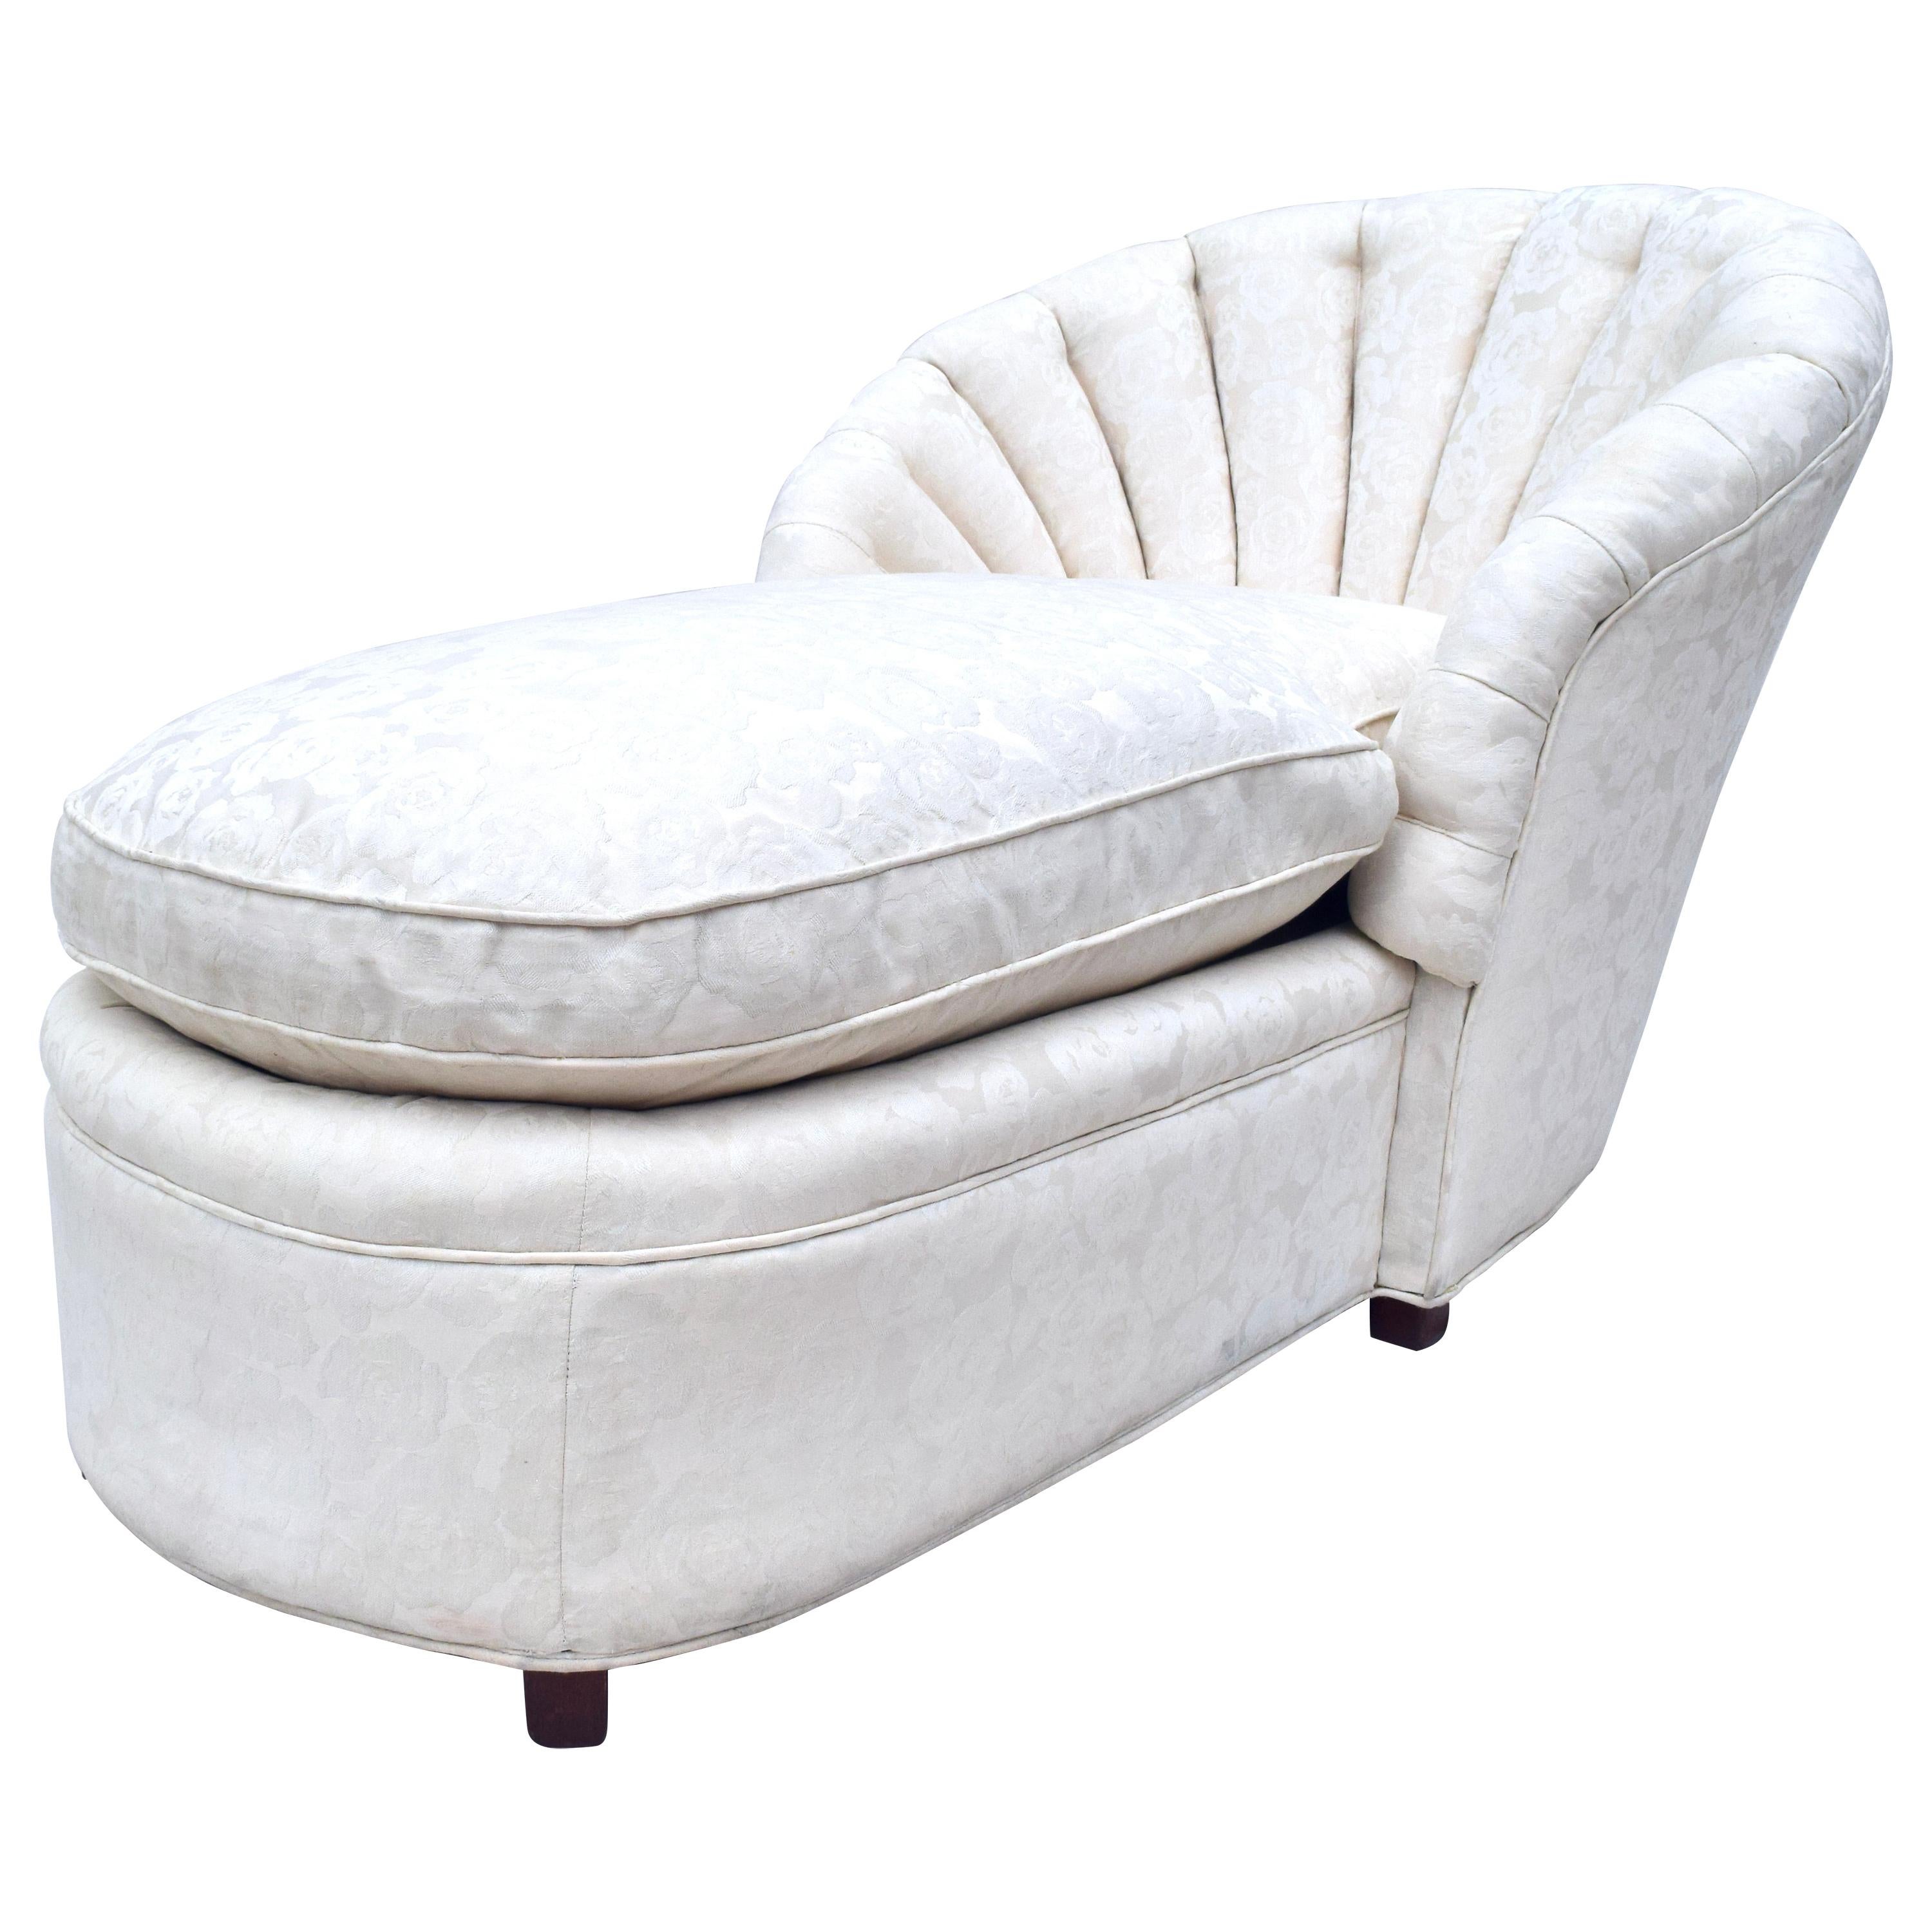 Scalloped Channel Back Clamshell Form Chaise Lounge